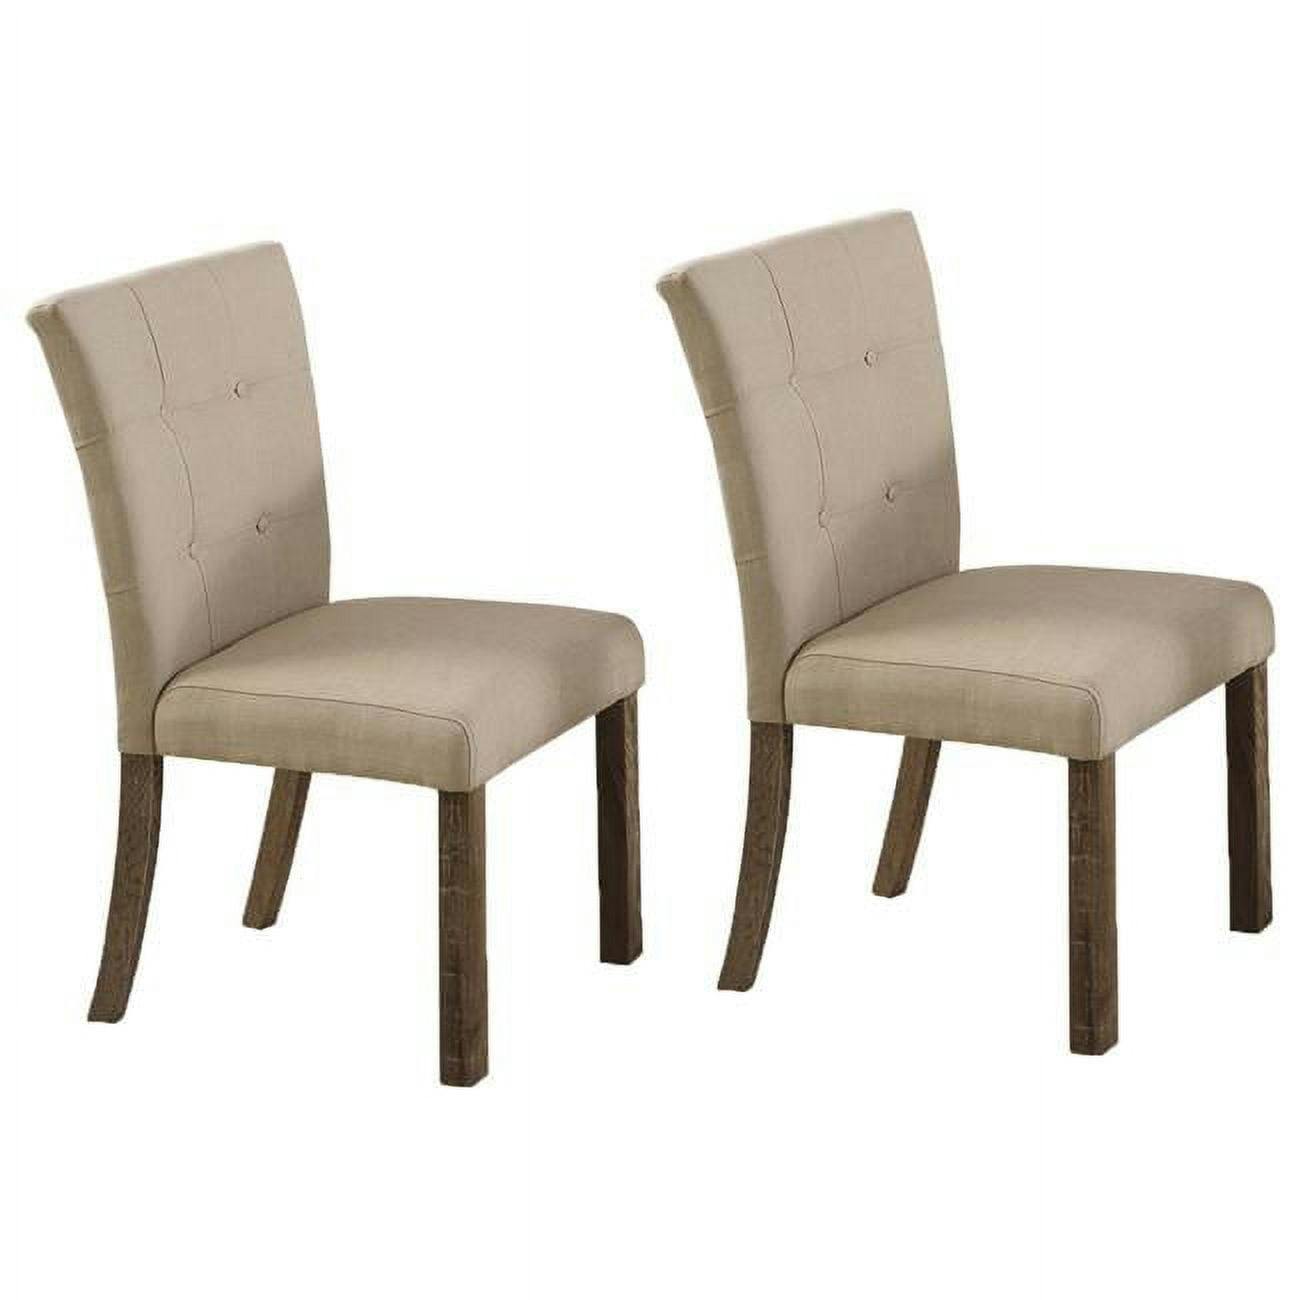 Hadley High-Back Parsons Side Chair in Light Gray & Beige, Set of 2